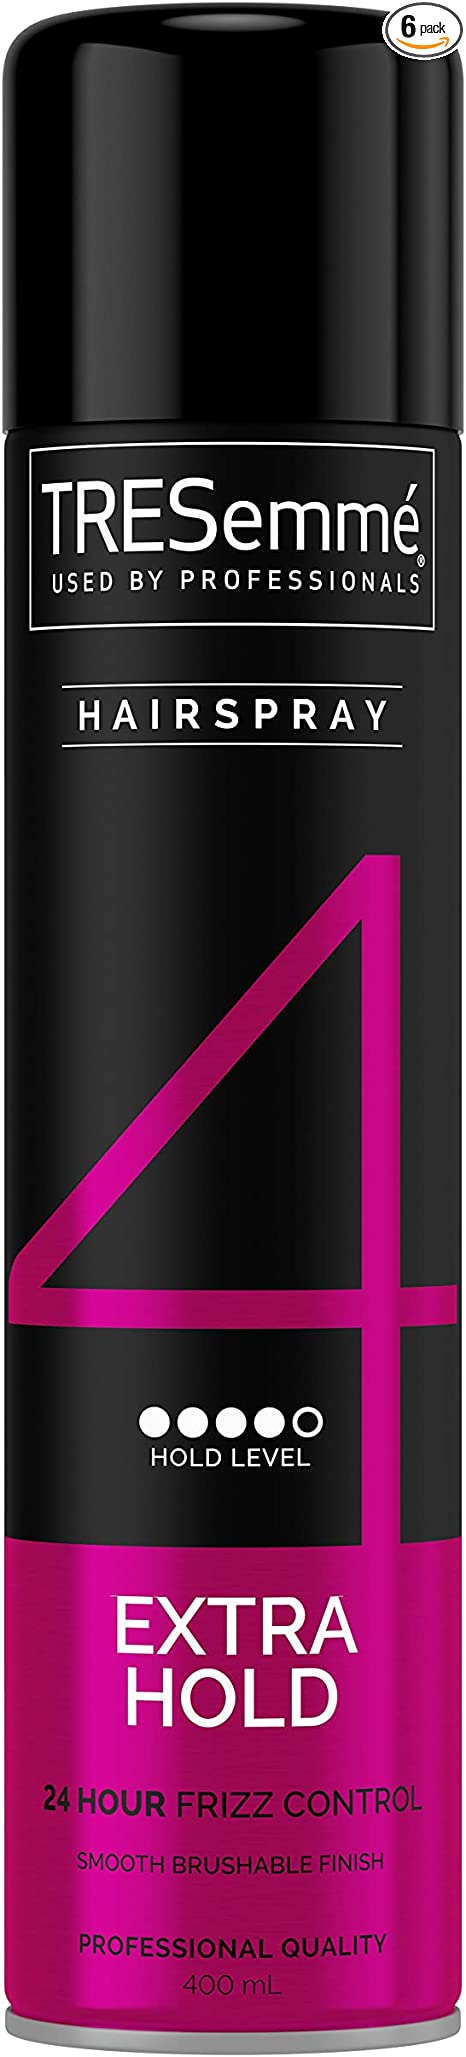 TRESemme Extra Hold 24-hour frizz control Hairspray for a smooth finish (6x400 ml)